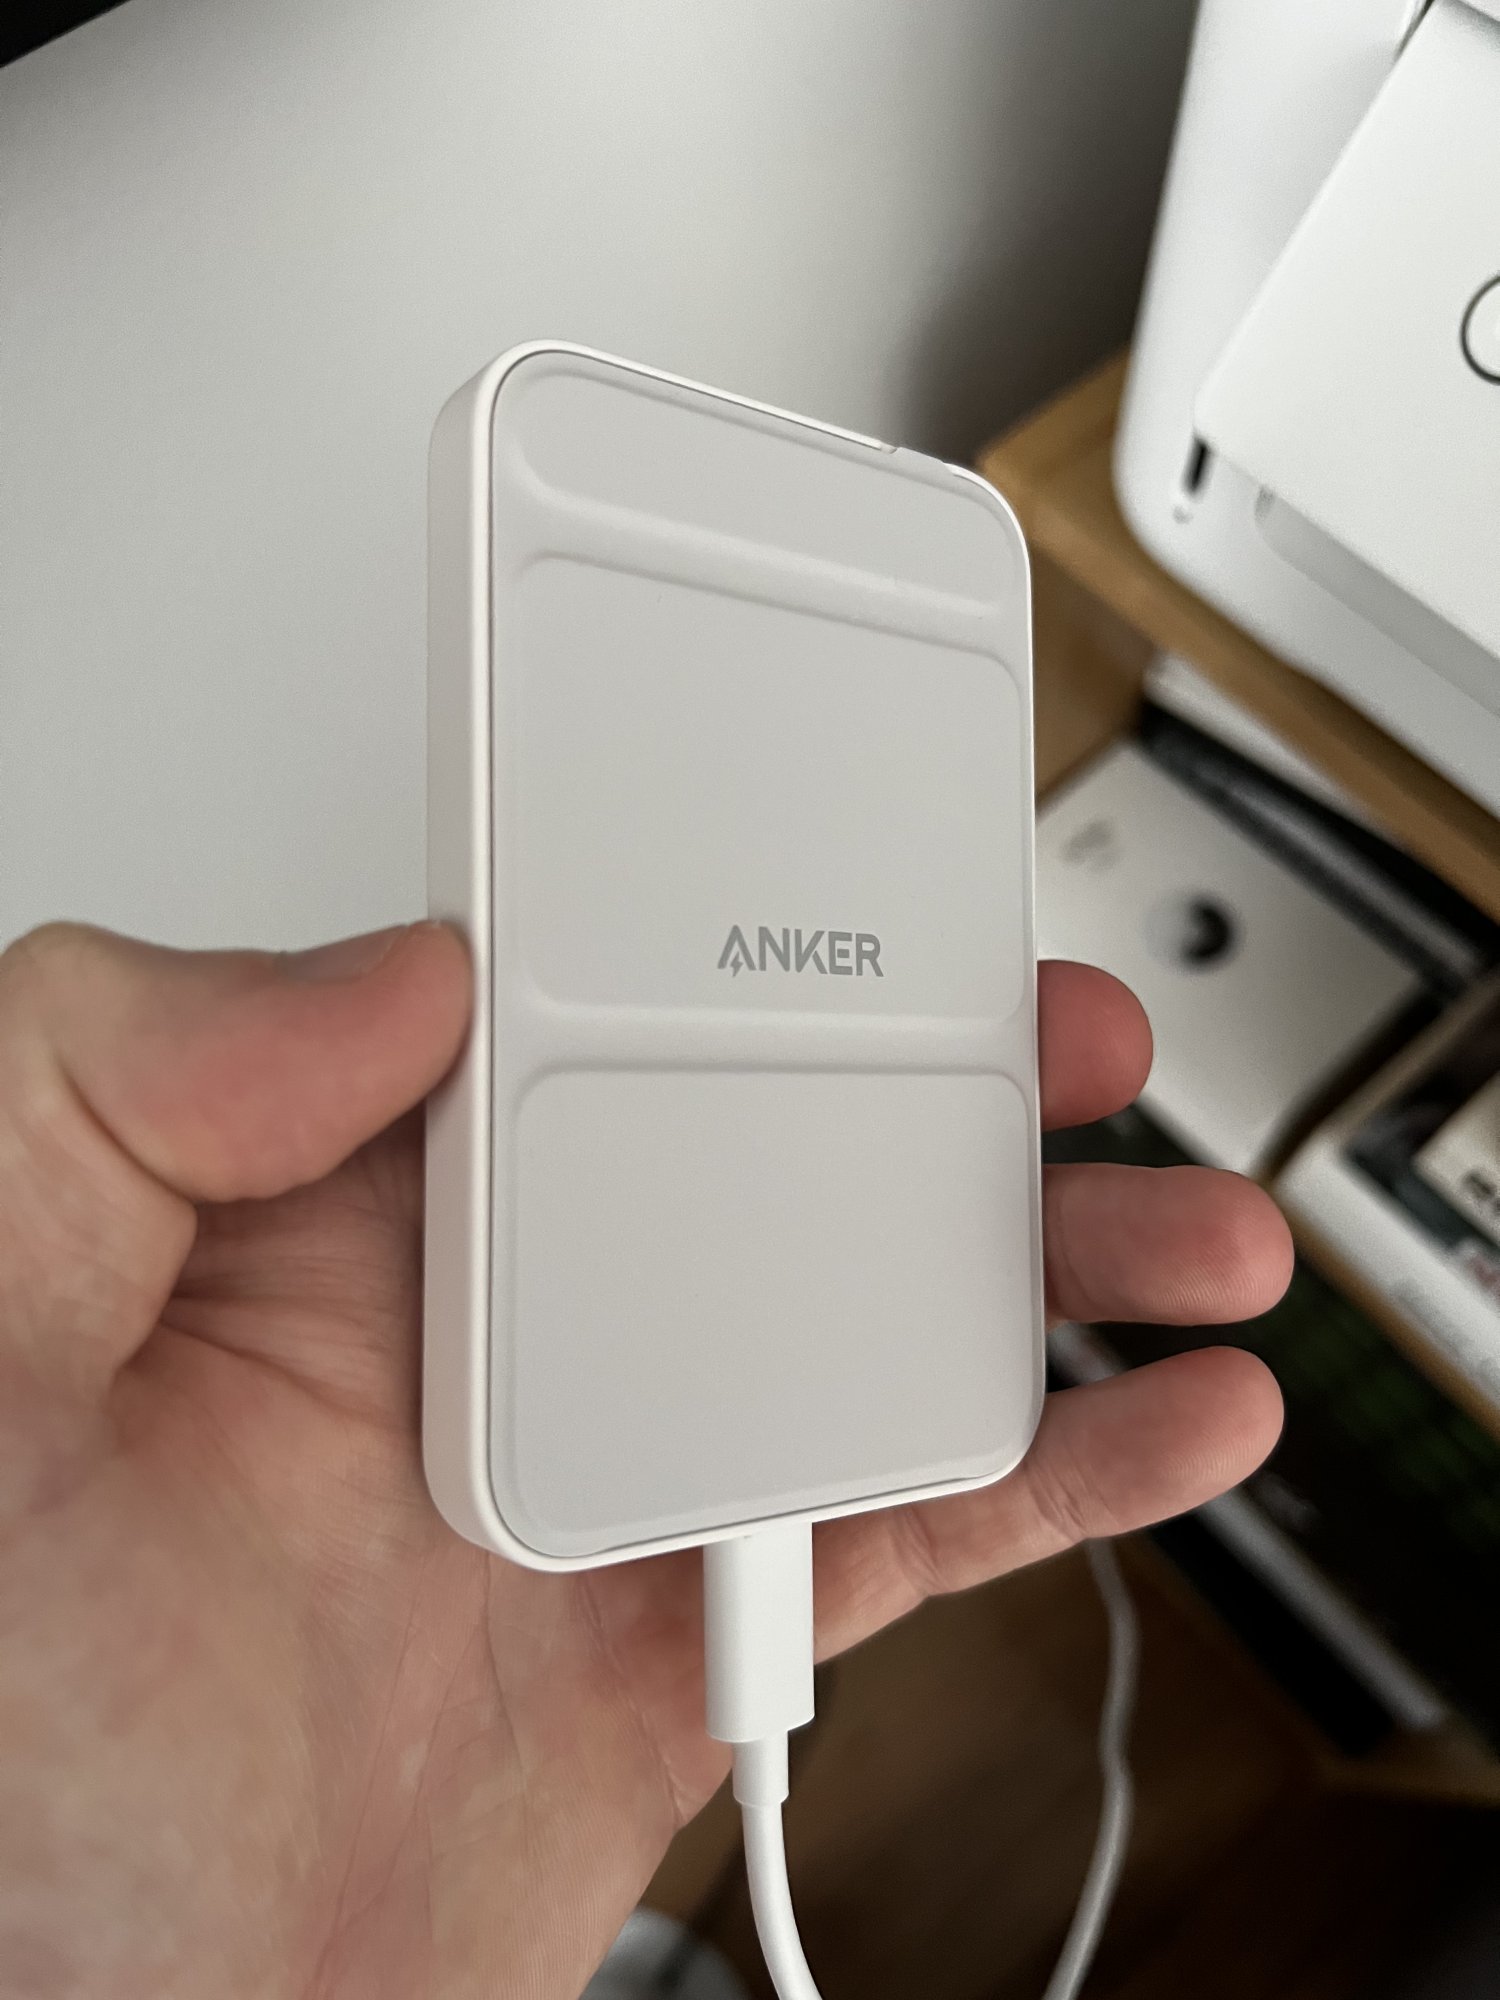 Anker Releases MagSafe-Compatible Battery Pack for iPhone 12 Lineup -  MacRumors